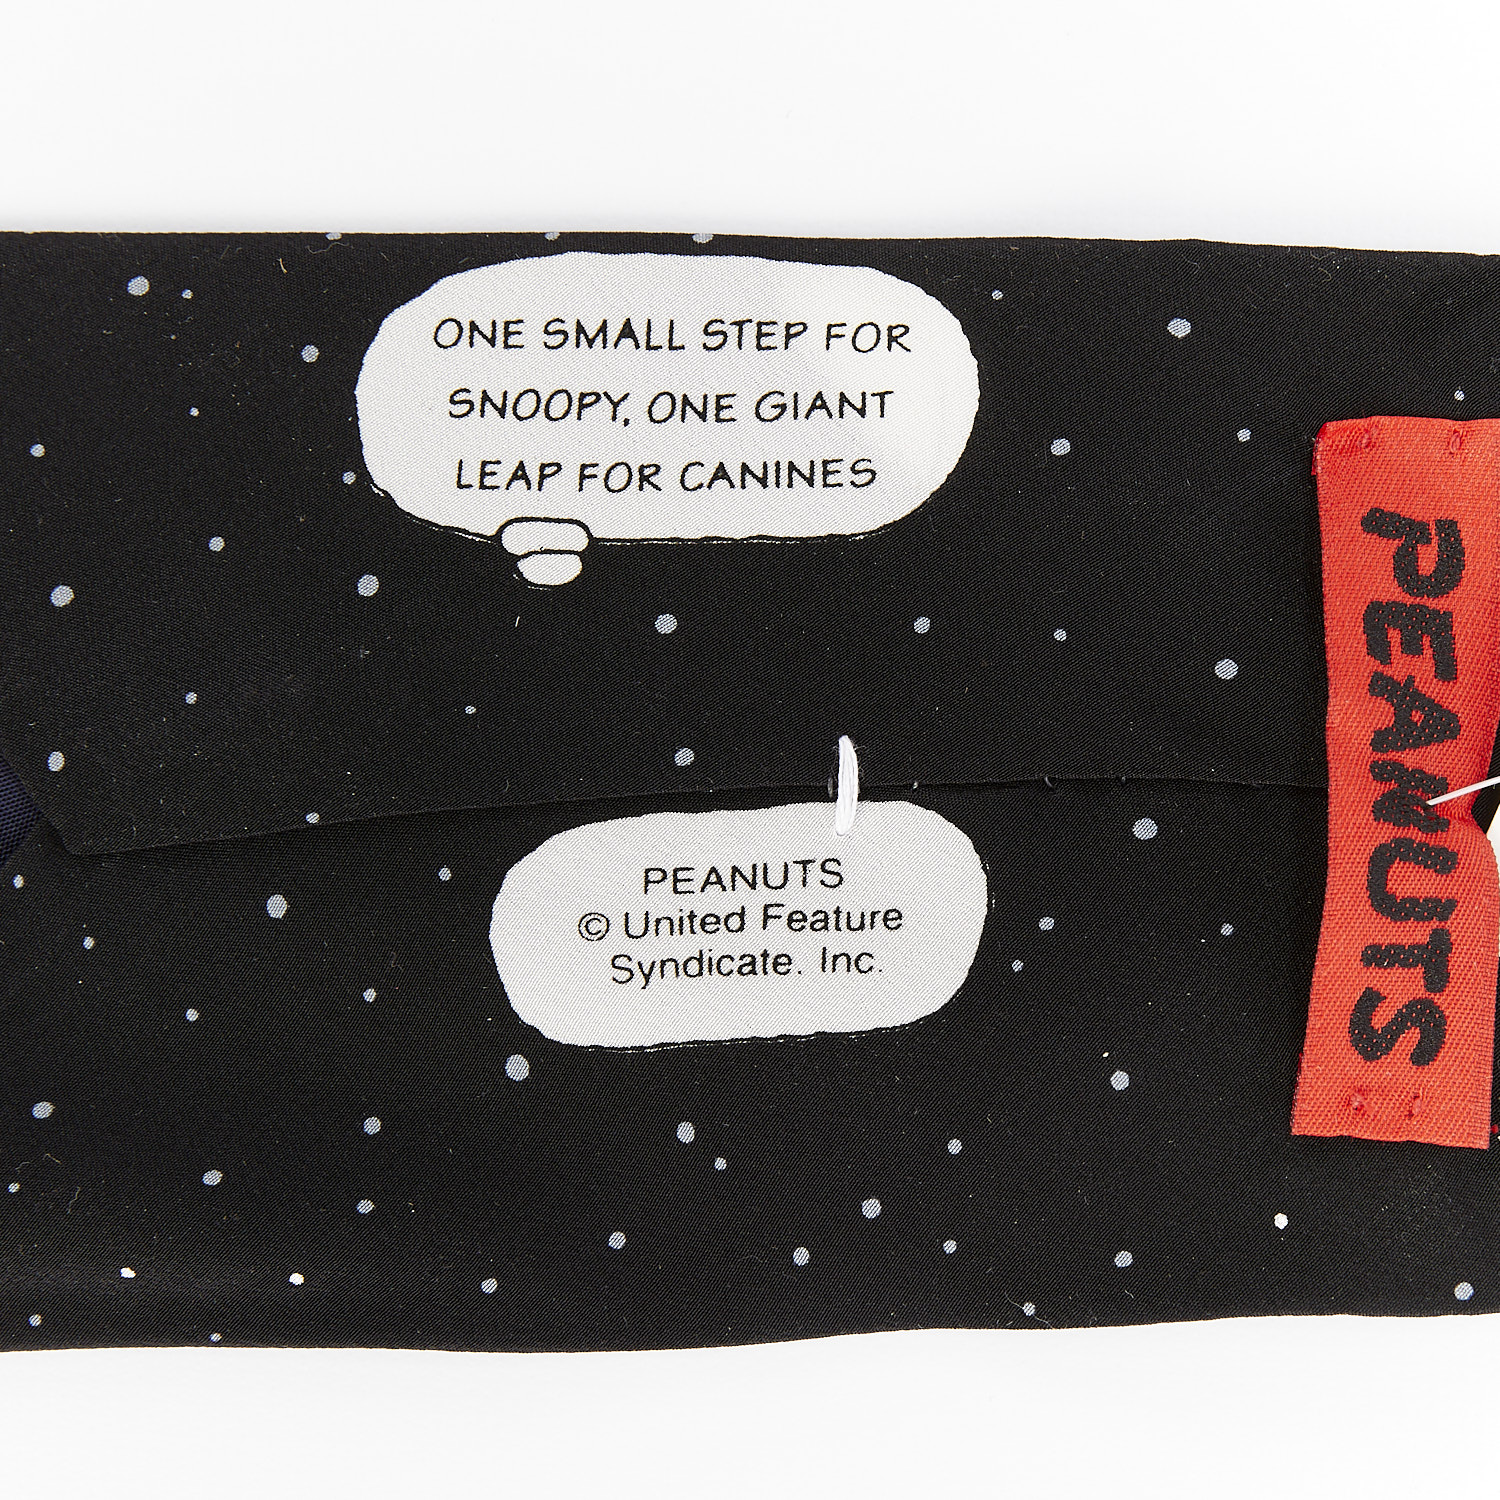 3 Ties of Snoopy - Striped & Space Themed - Image 10 of 10